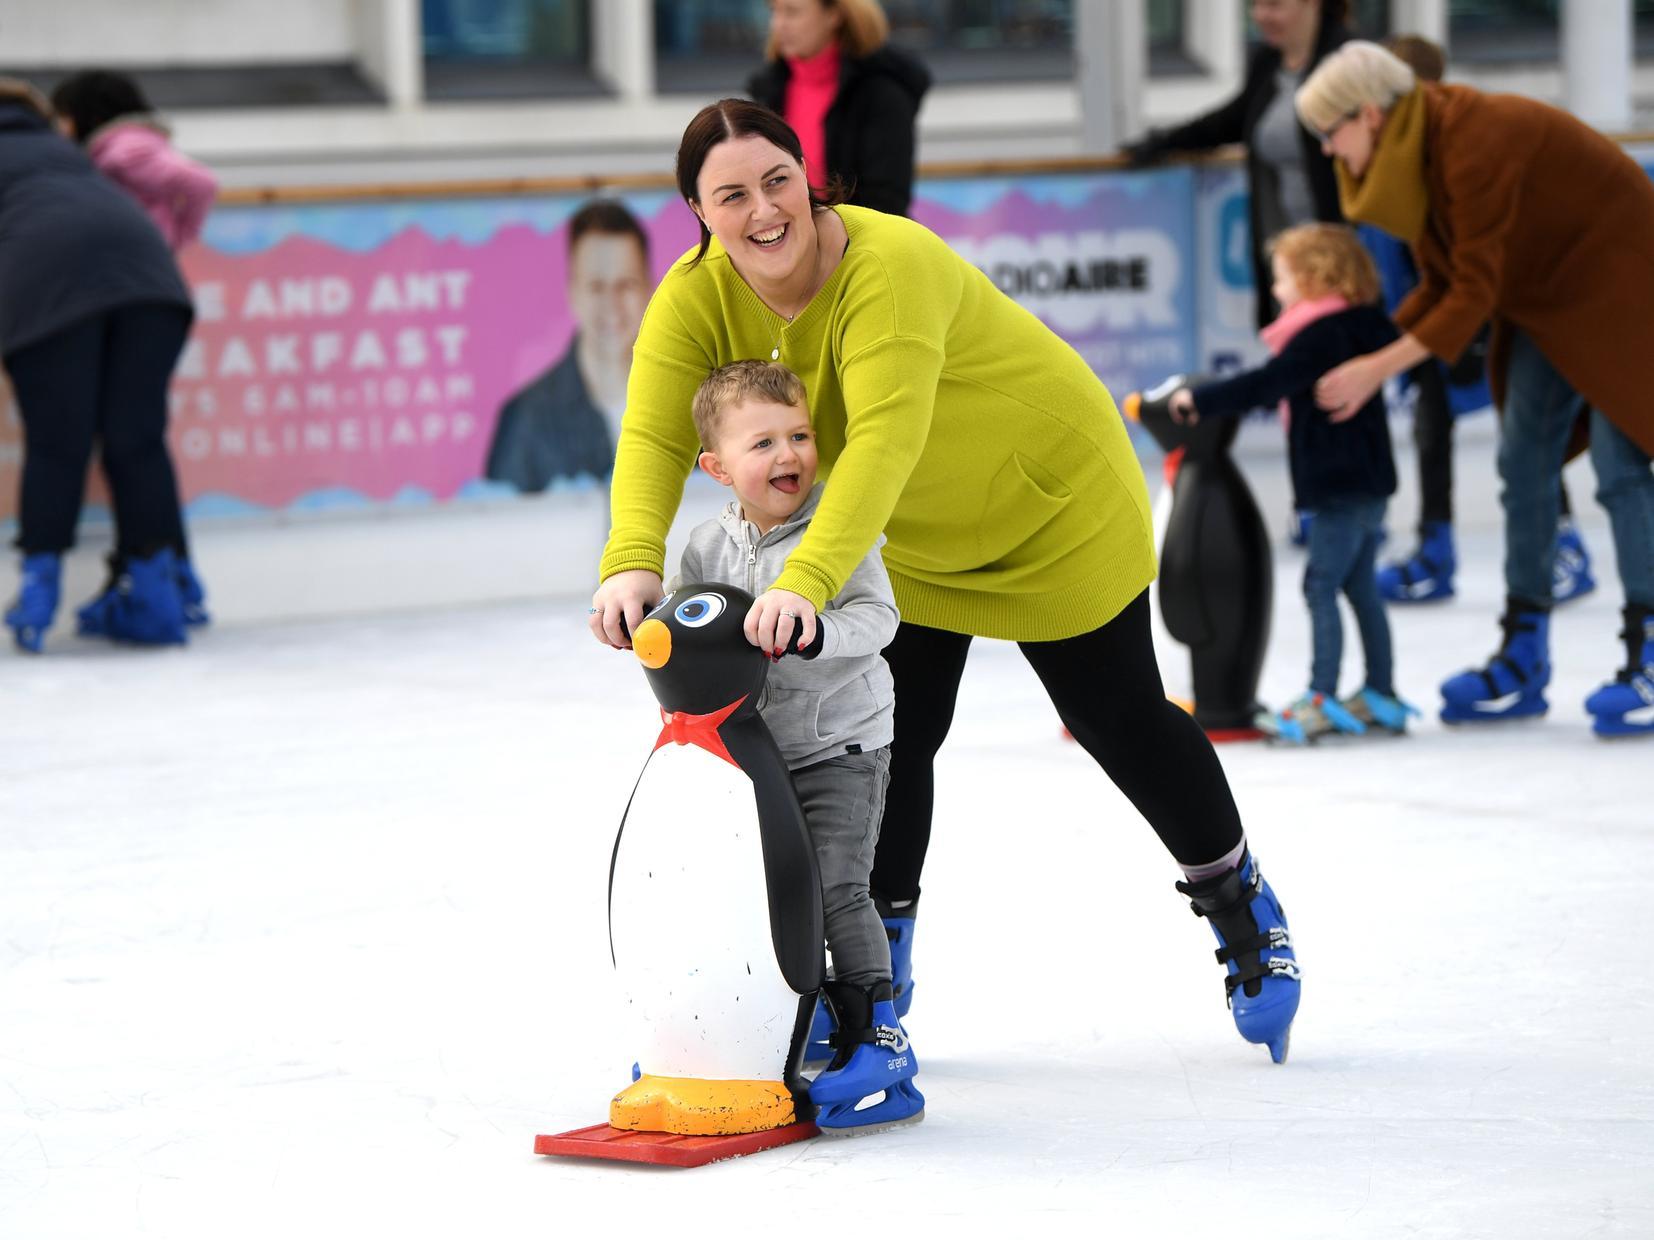 Council chiefs have confirmed Leeds's coolest winter attraction will be making a return to Millennium Square in 2020 from Friday, January 31, until Sunday, February 23.